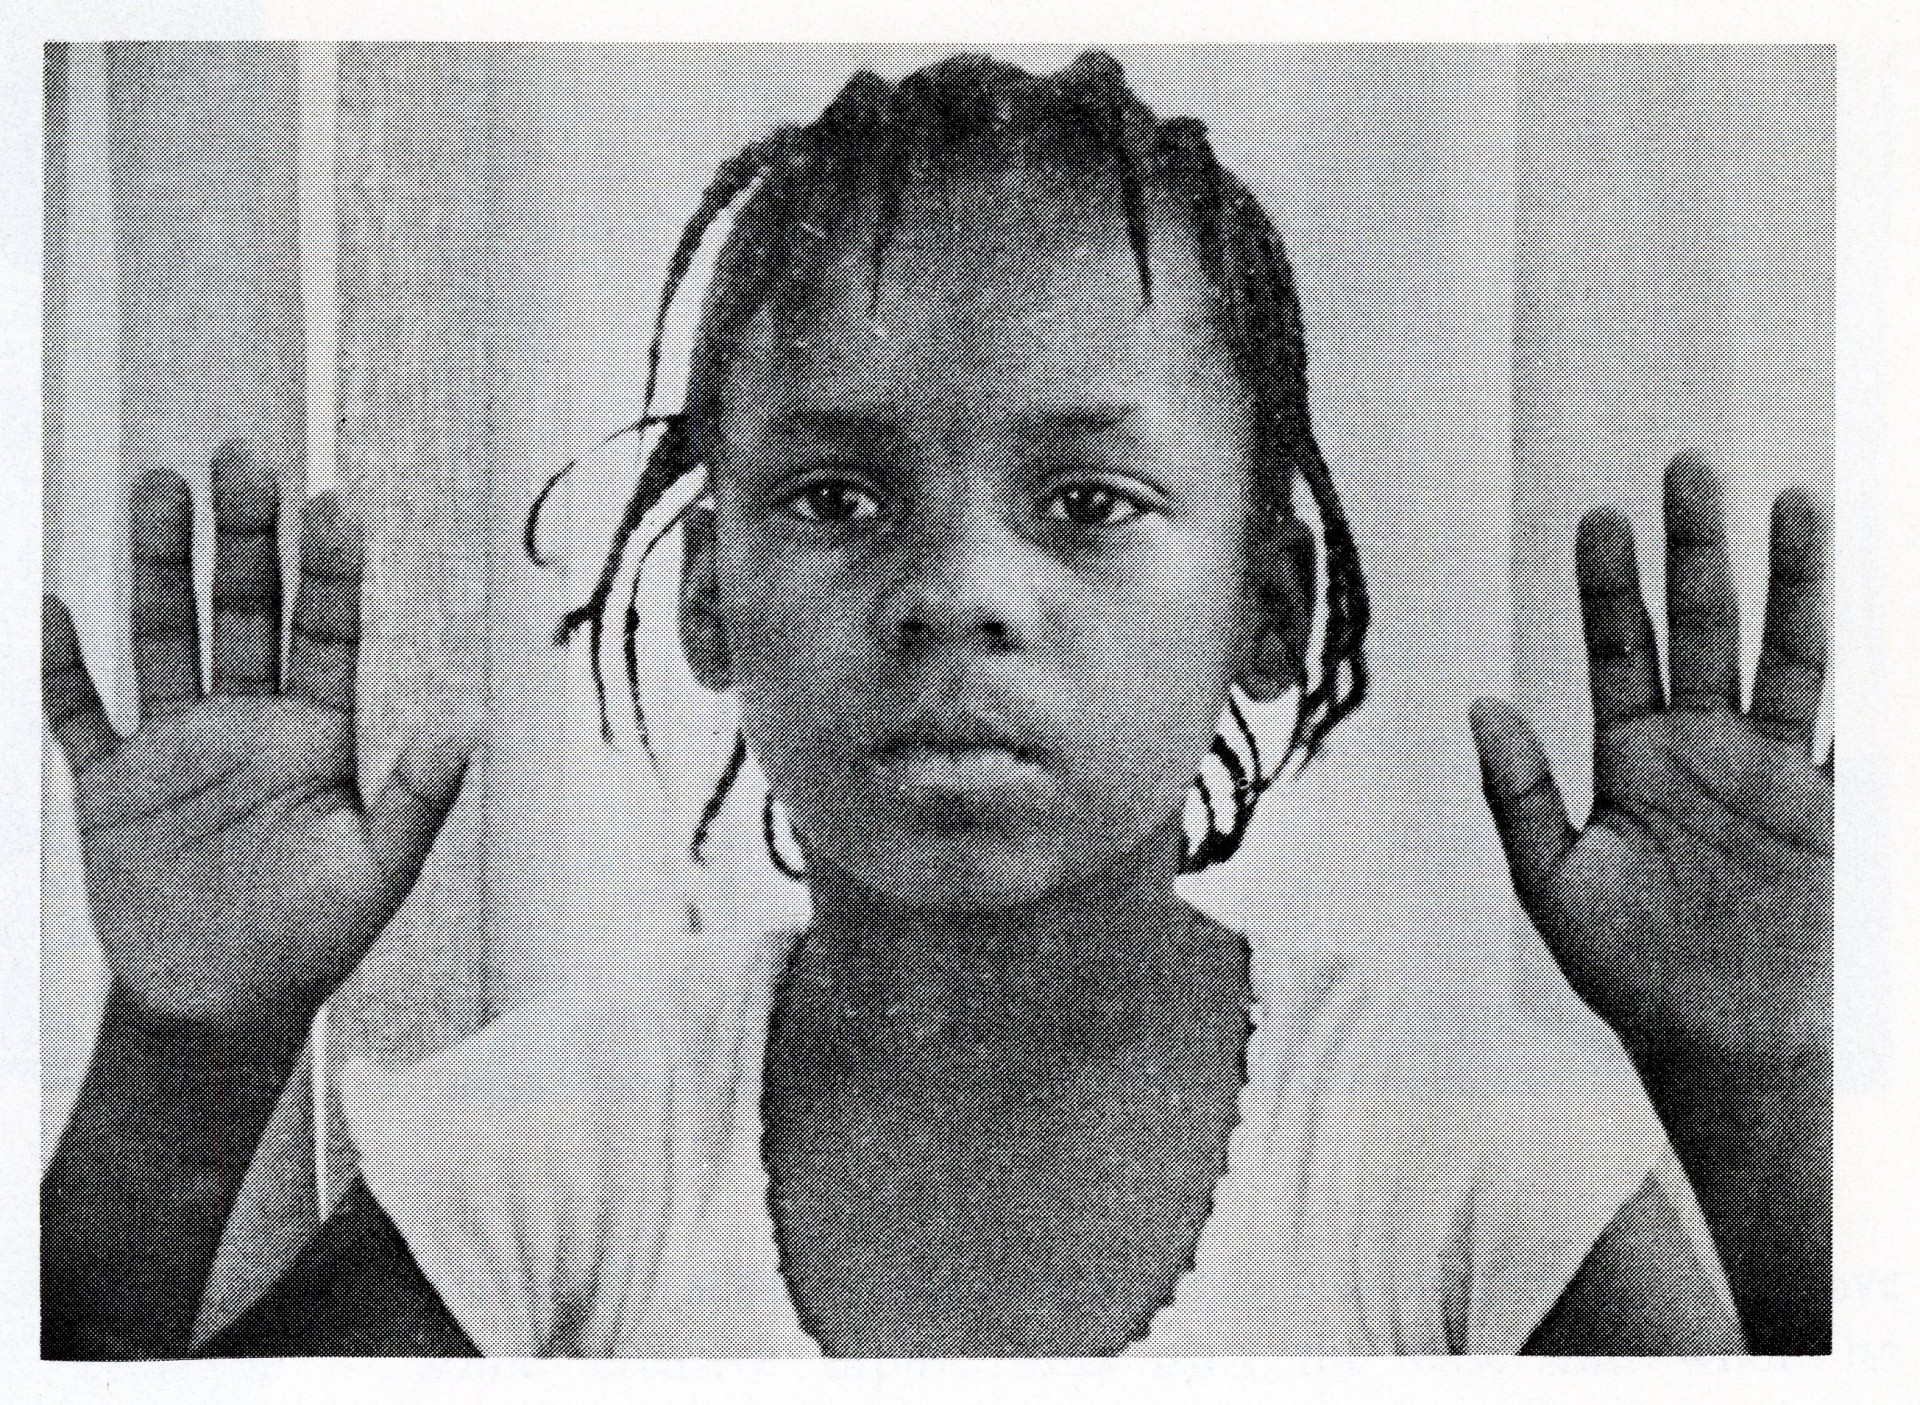 Black and white still from the film "Your Children Come Back to You" shows a young girl with short braids. She raises her hands up and turns her palms towards the camera.